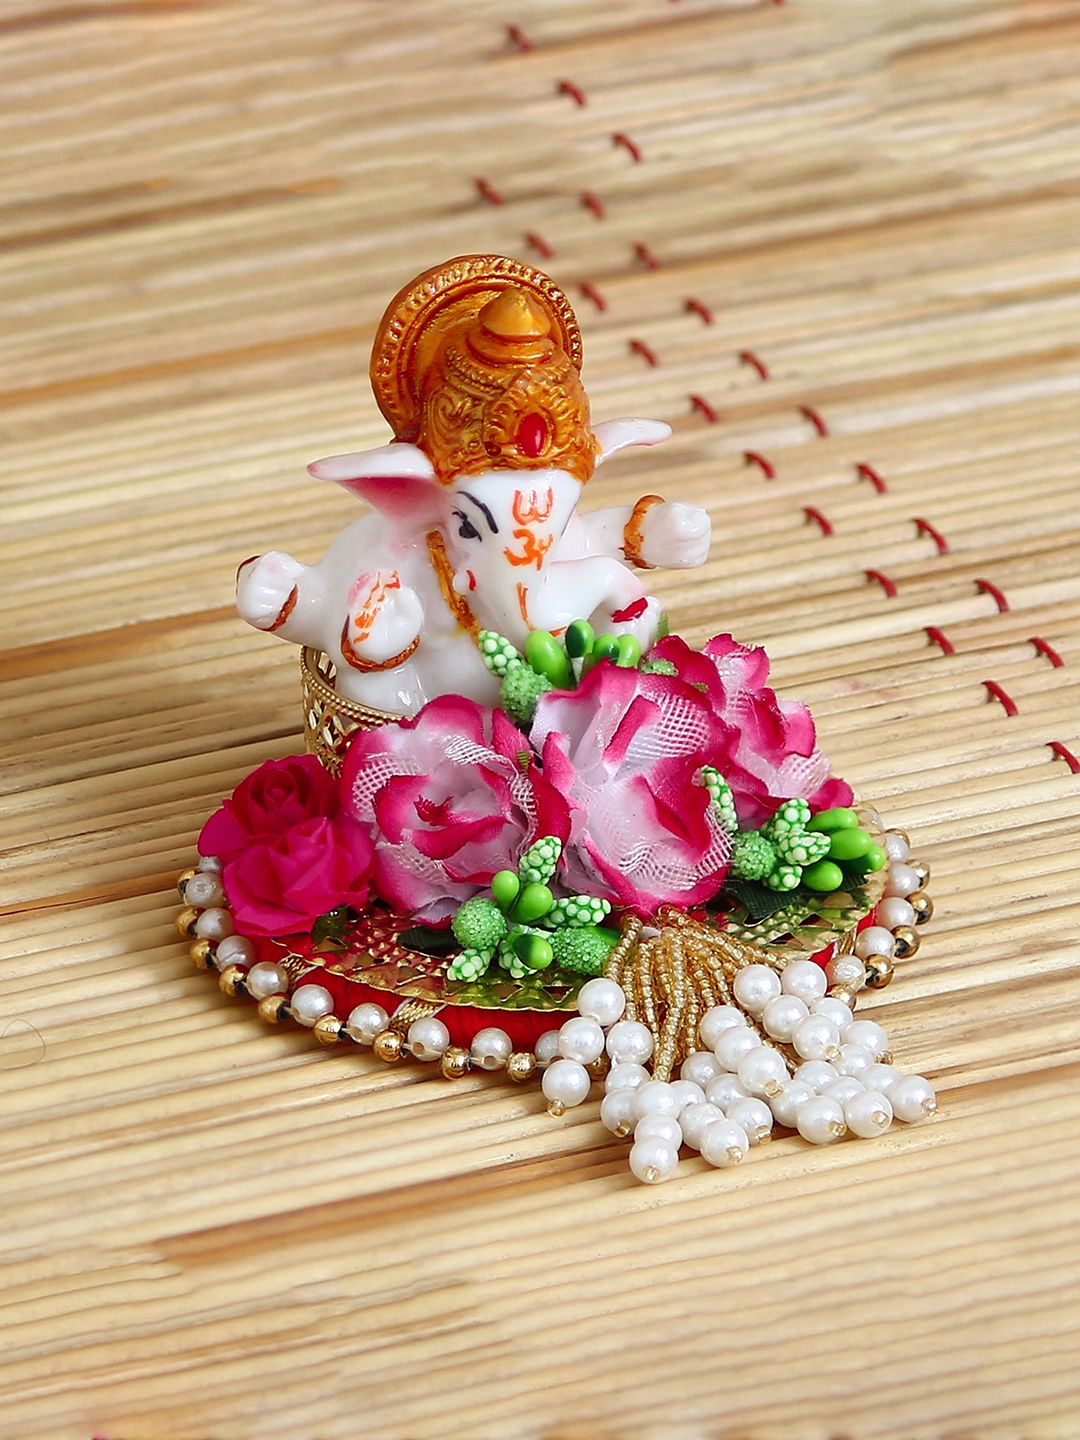 eCraftIndia White & Pink Handcrafted Lord Ganesha On Decorative Plate With Flowers Showpiece Price in India